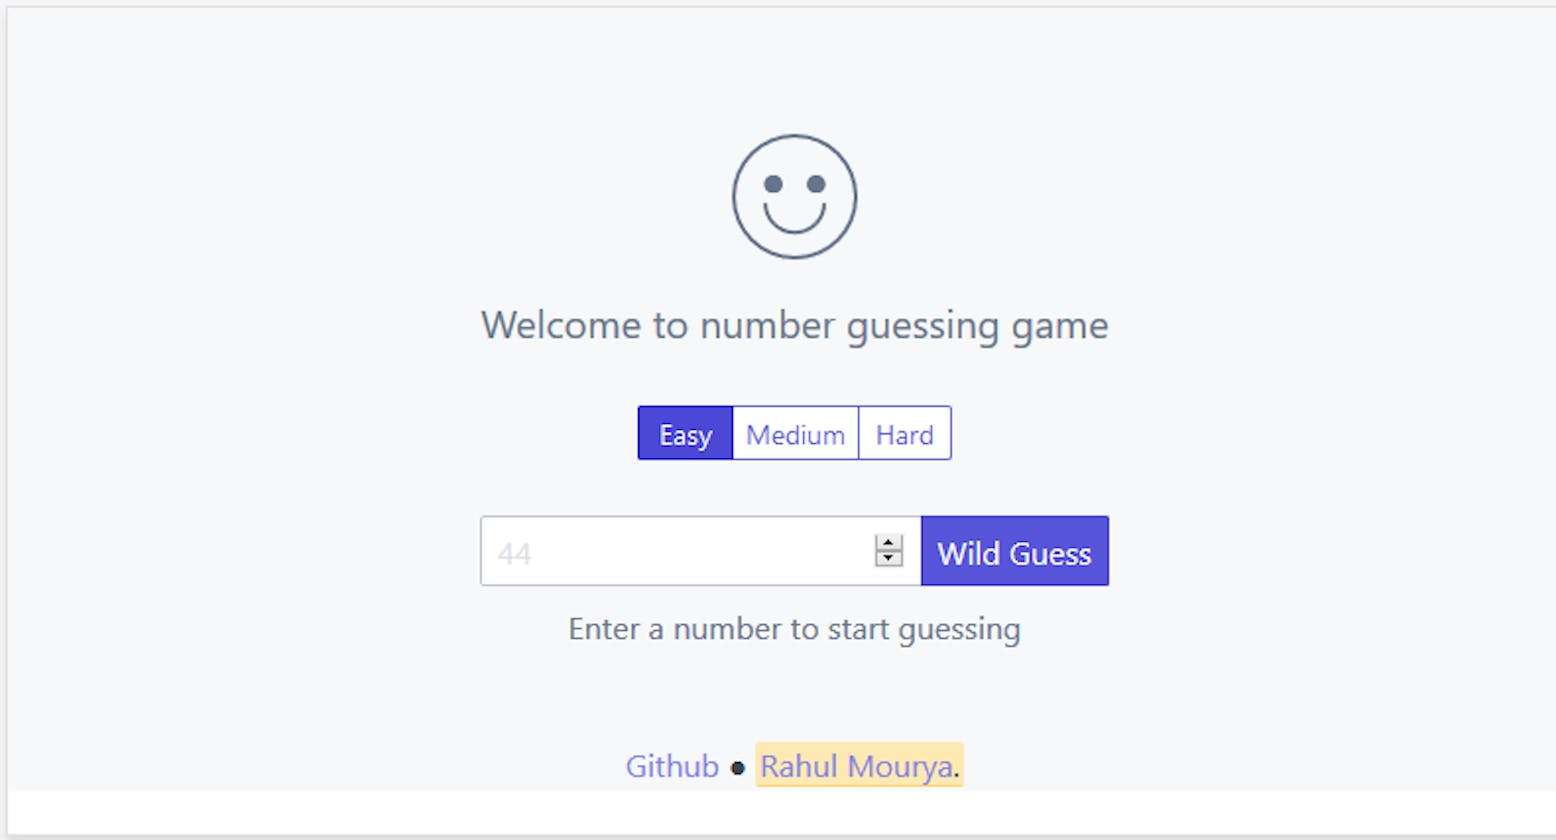 Number guessing game in - Hashnode